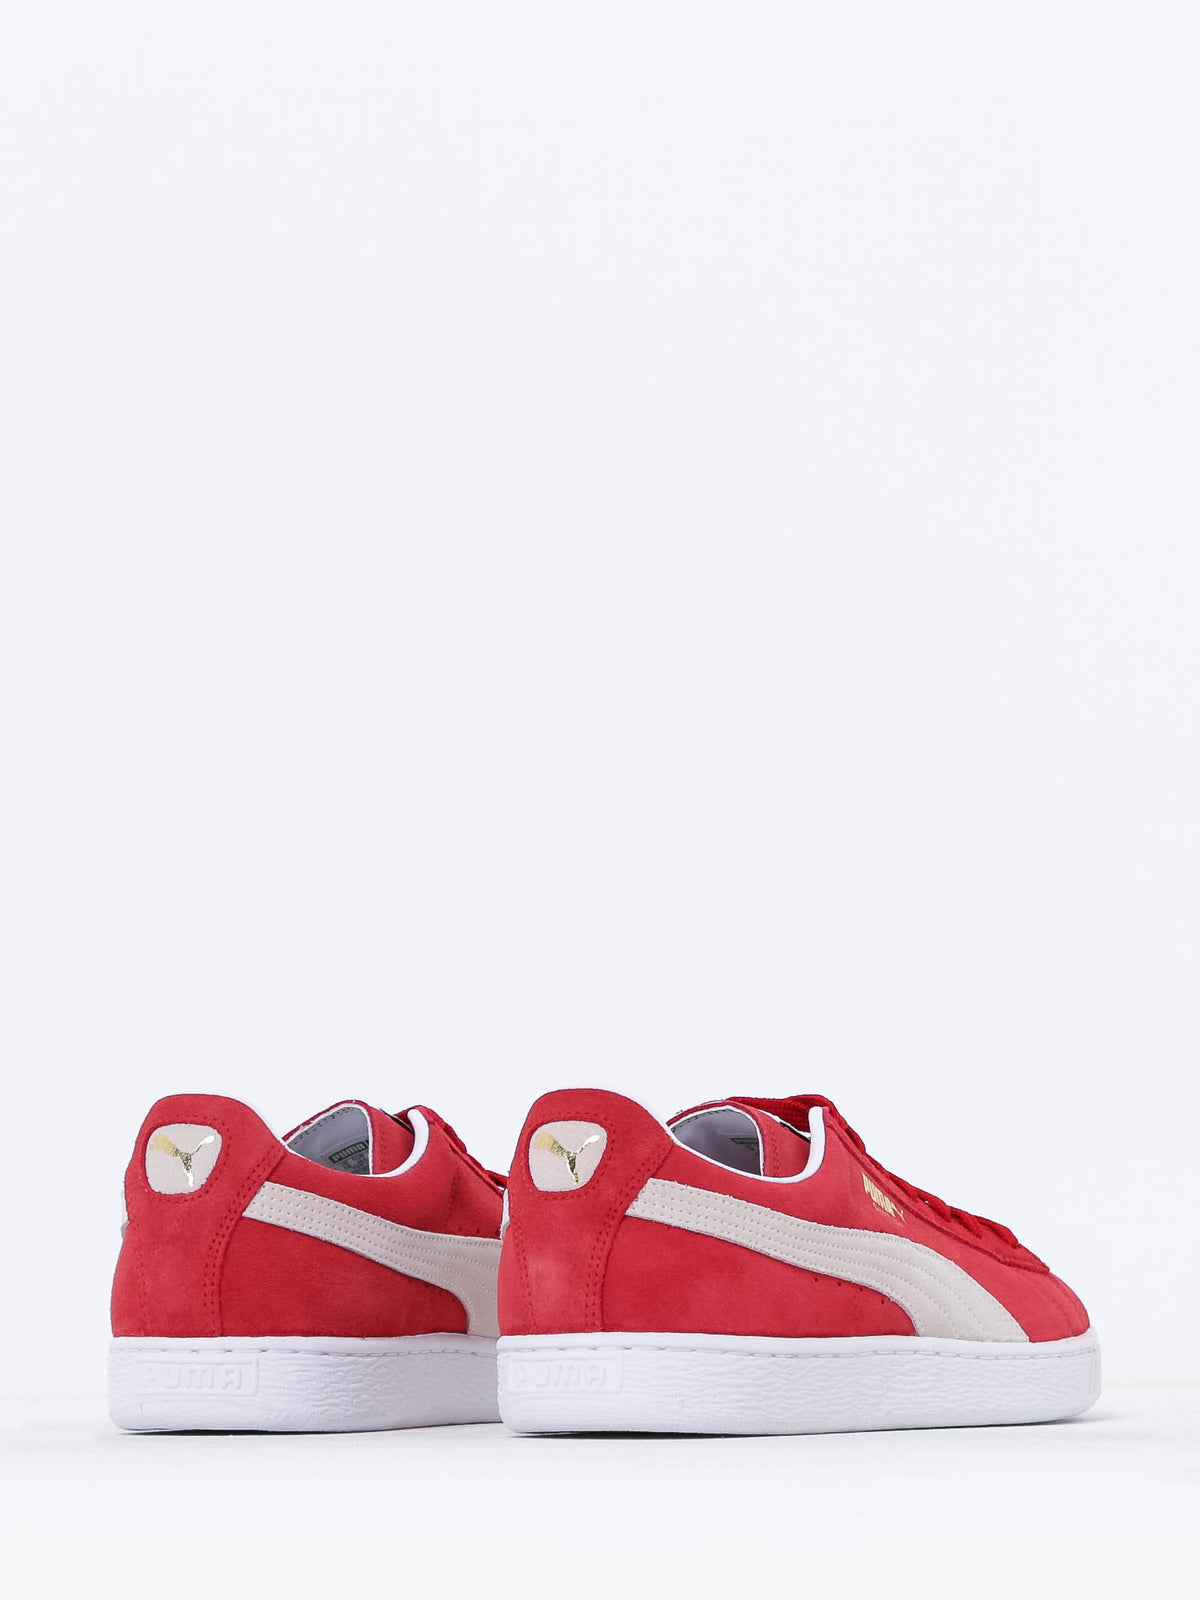 Unisex Suede Classic Sneaker in Red